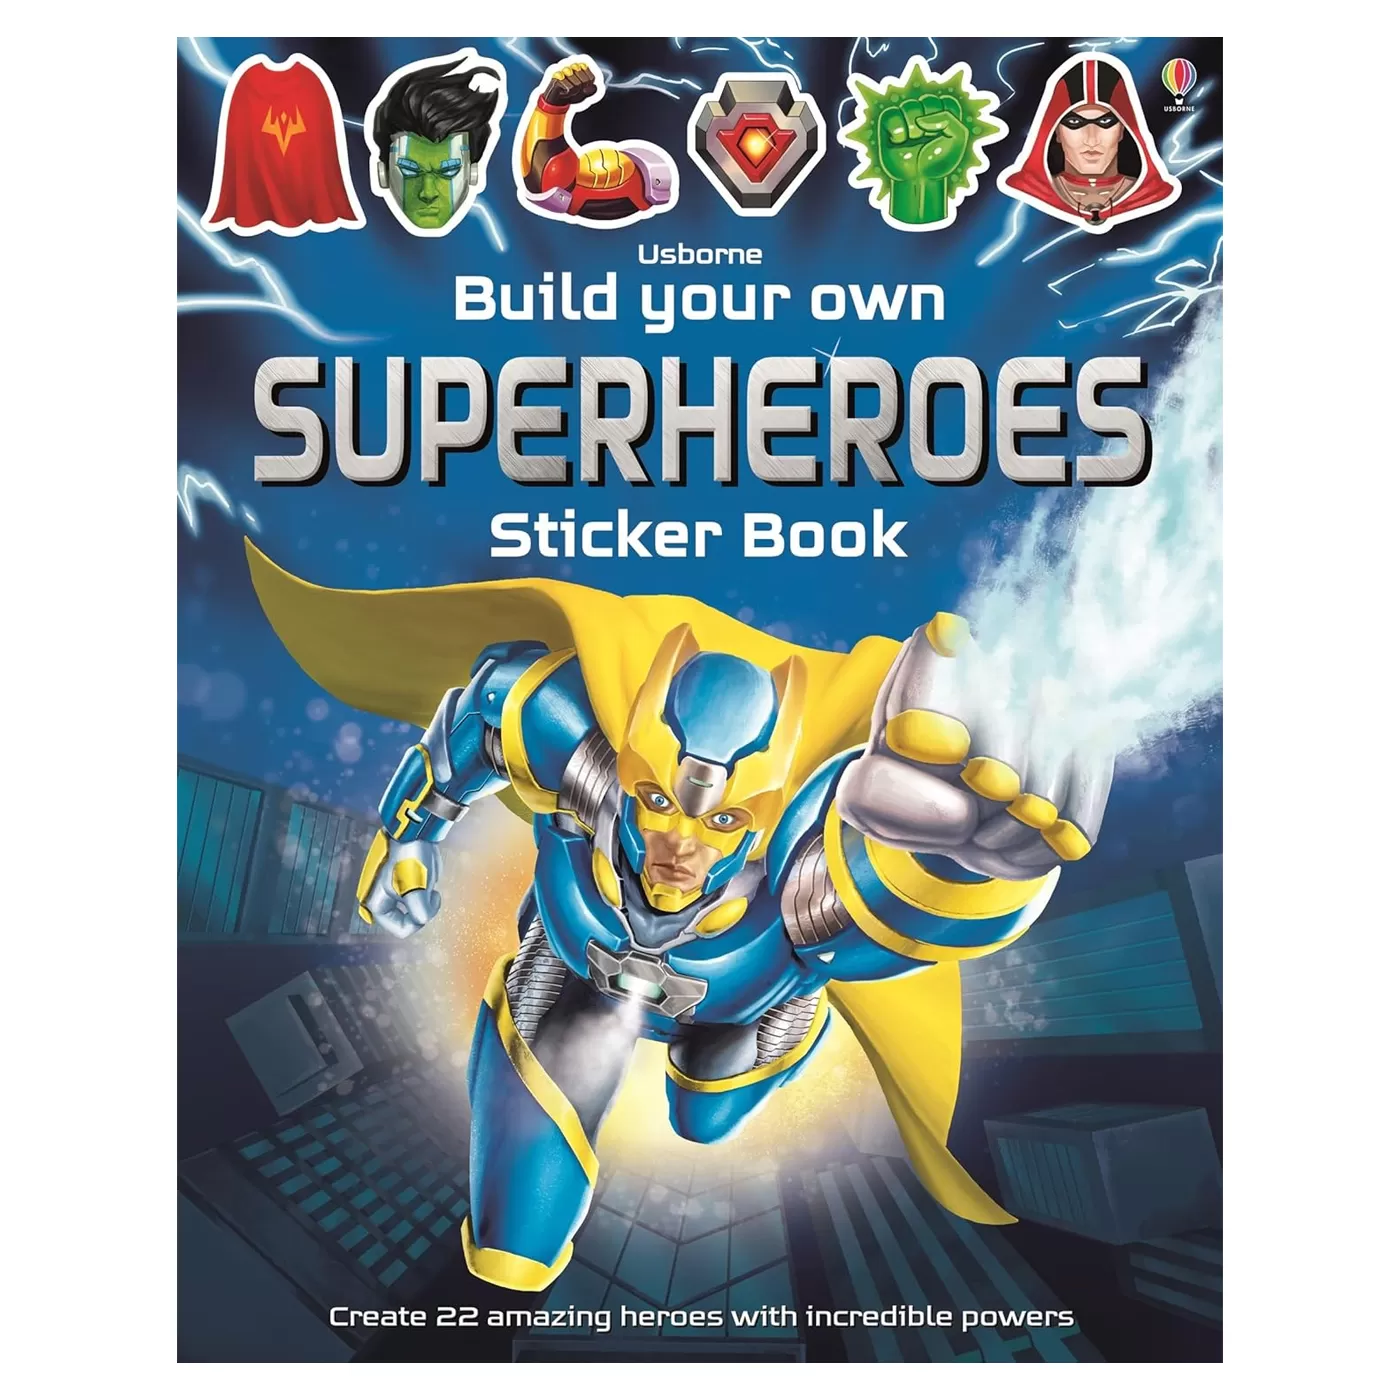  Build Your Own Superheroes Sticker Book